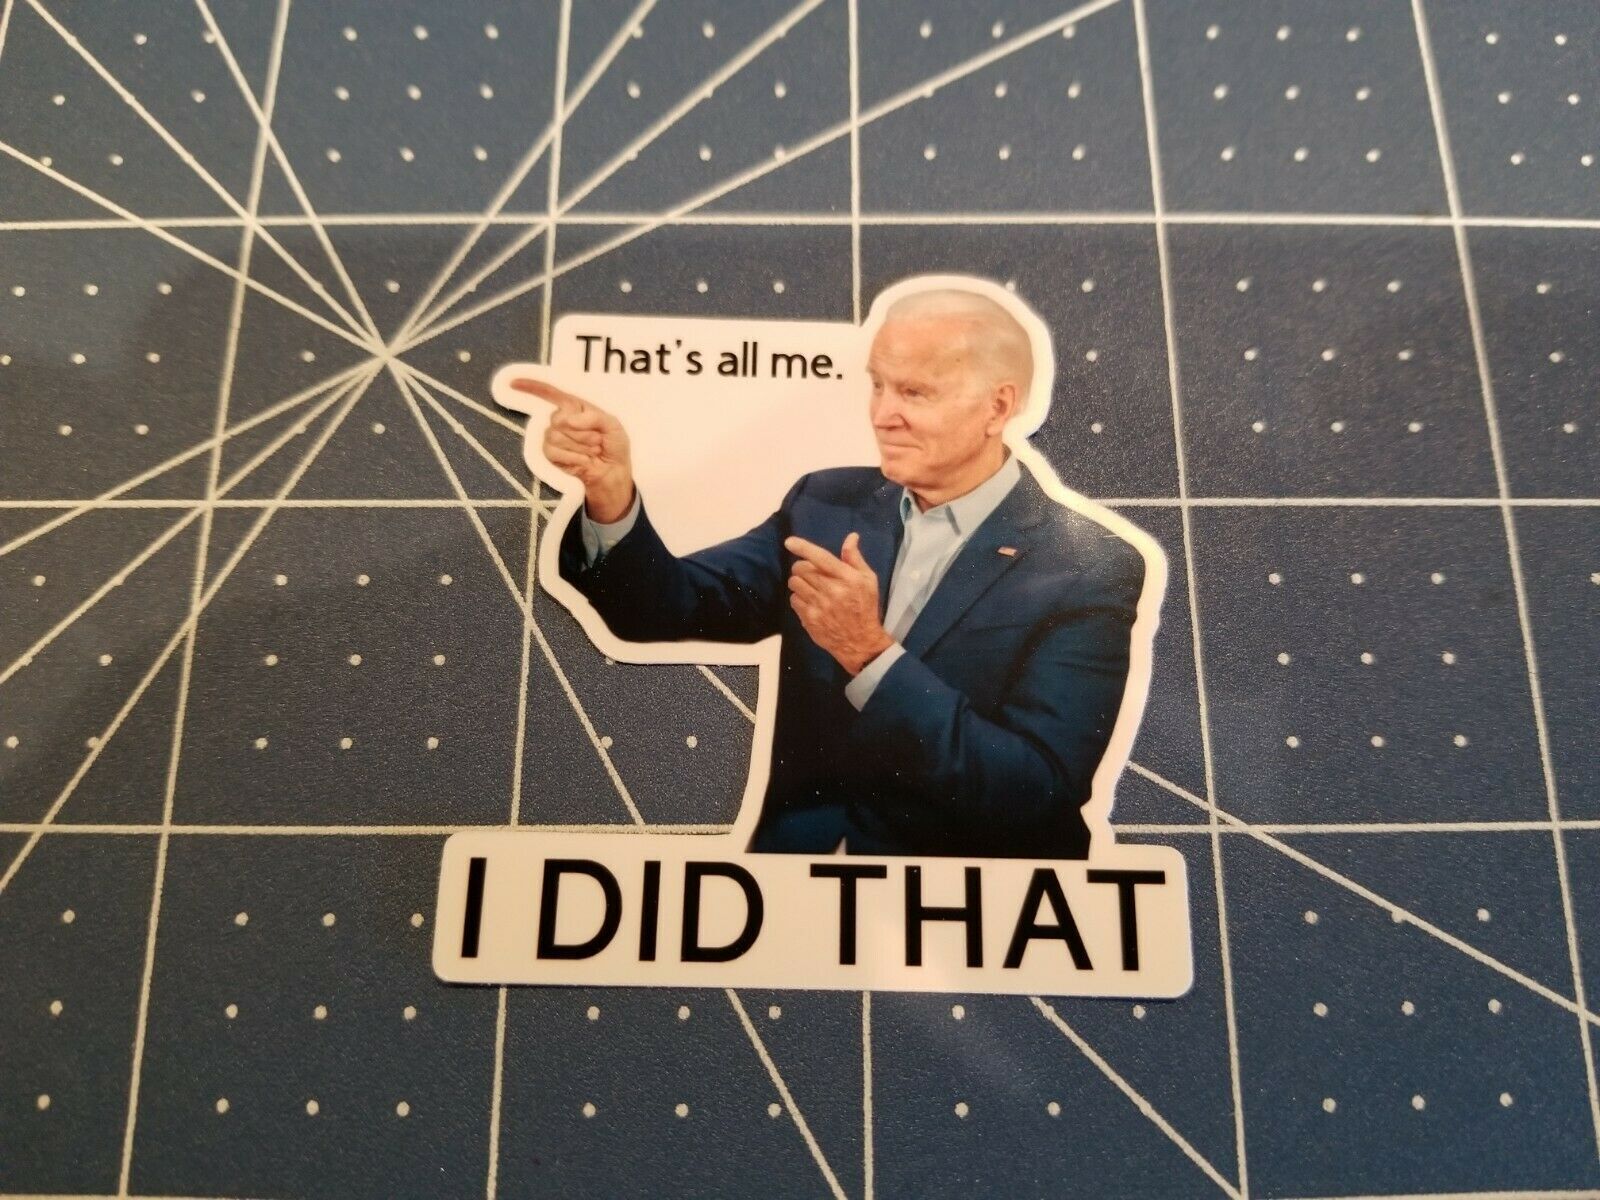 100 PCS JOE BIDEN FUNNY STICKER THAT\'S ALL ME I DID THAT. (POINTED TO YOUR LEFT)